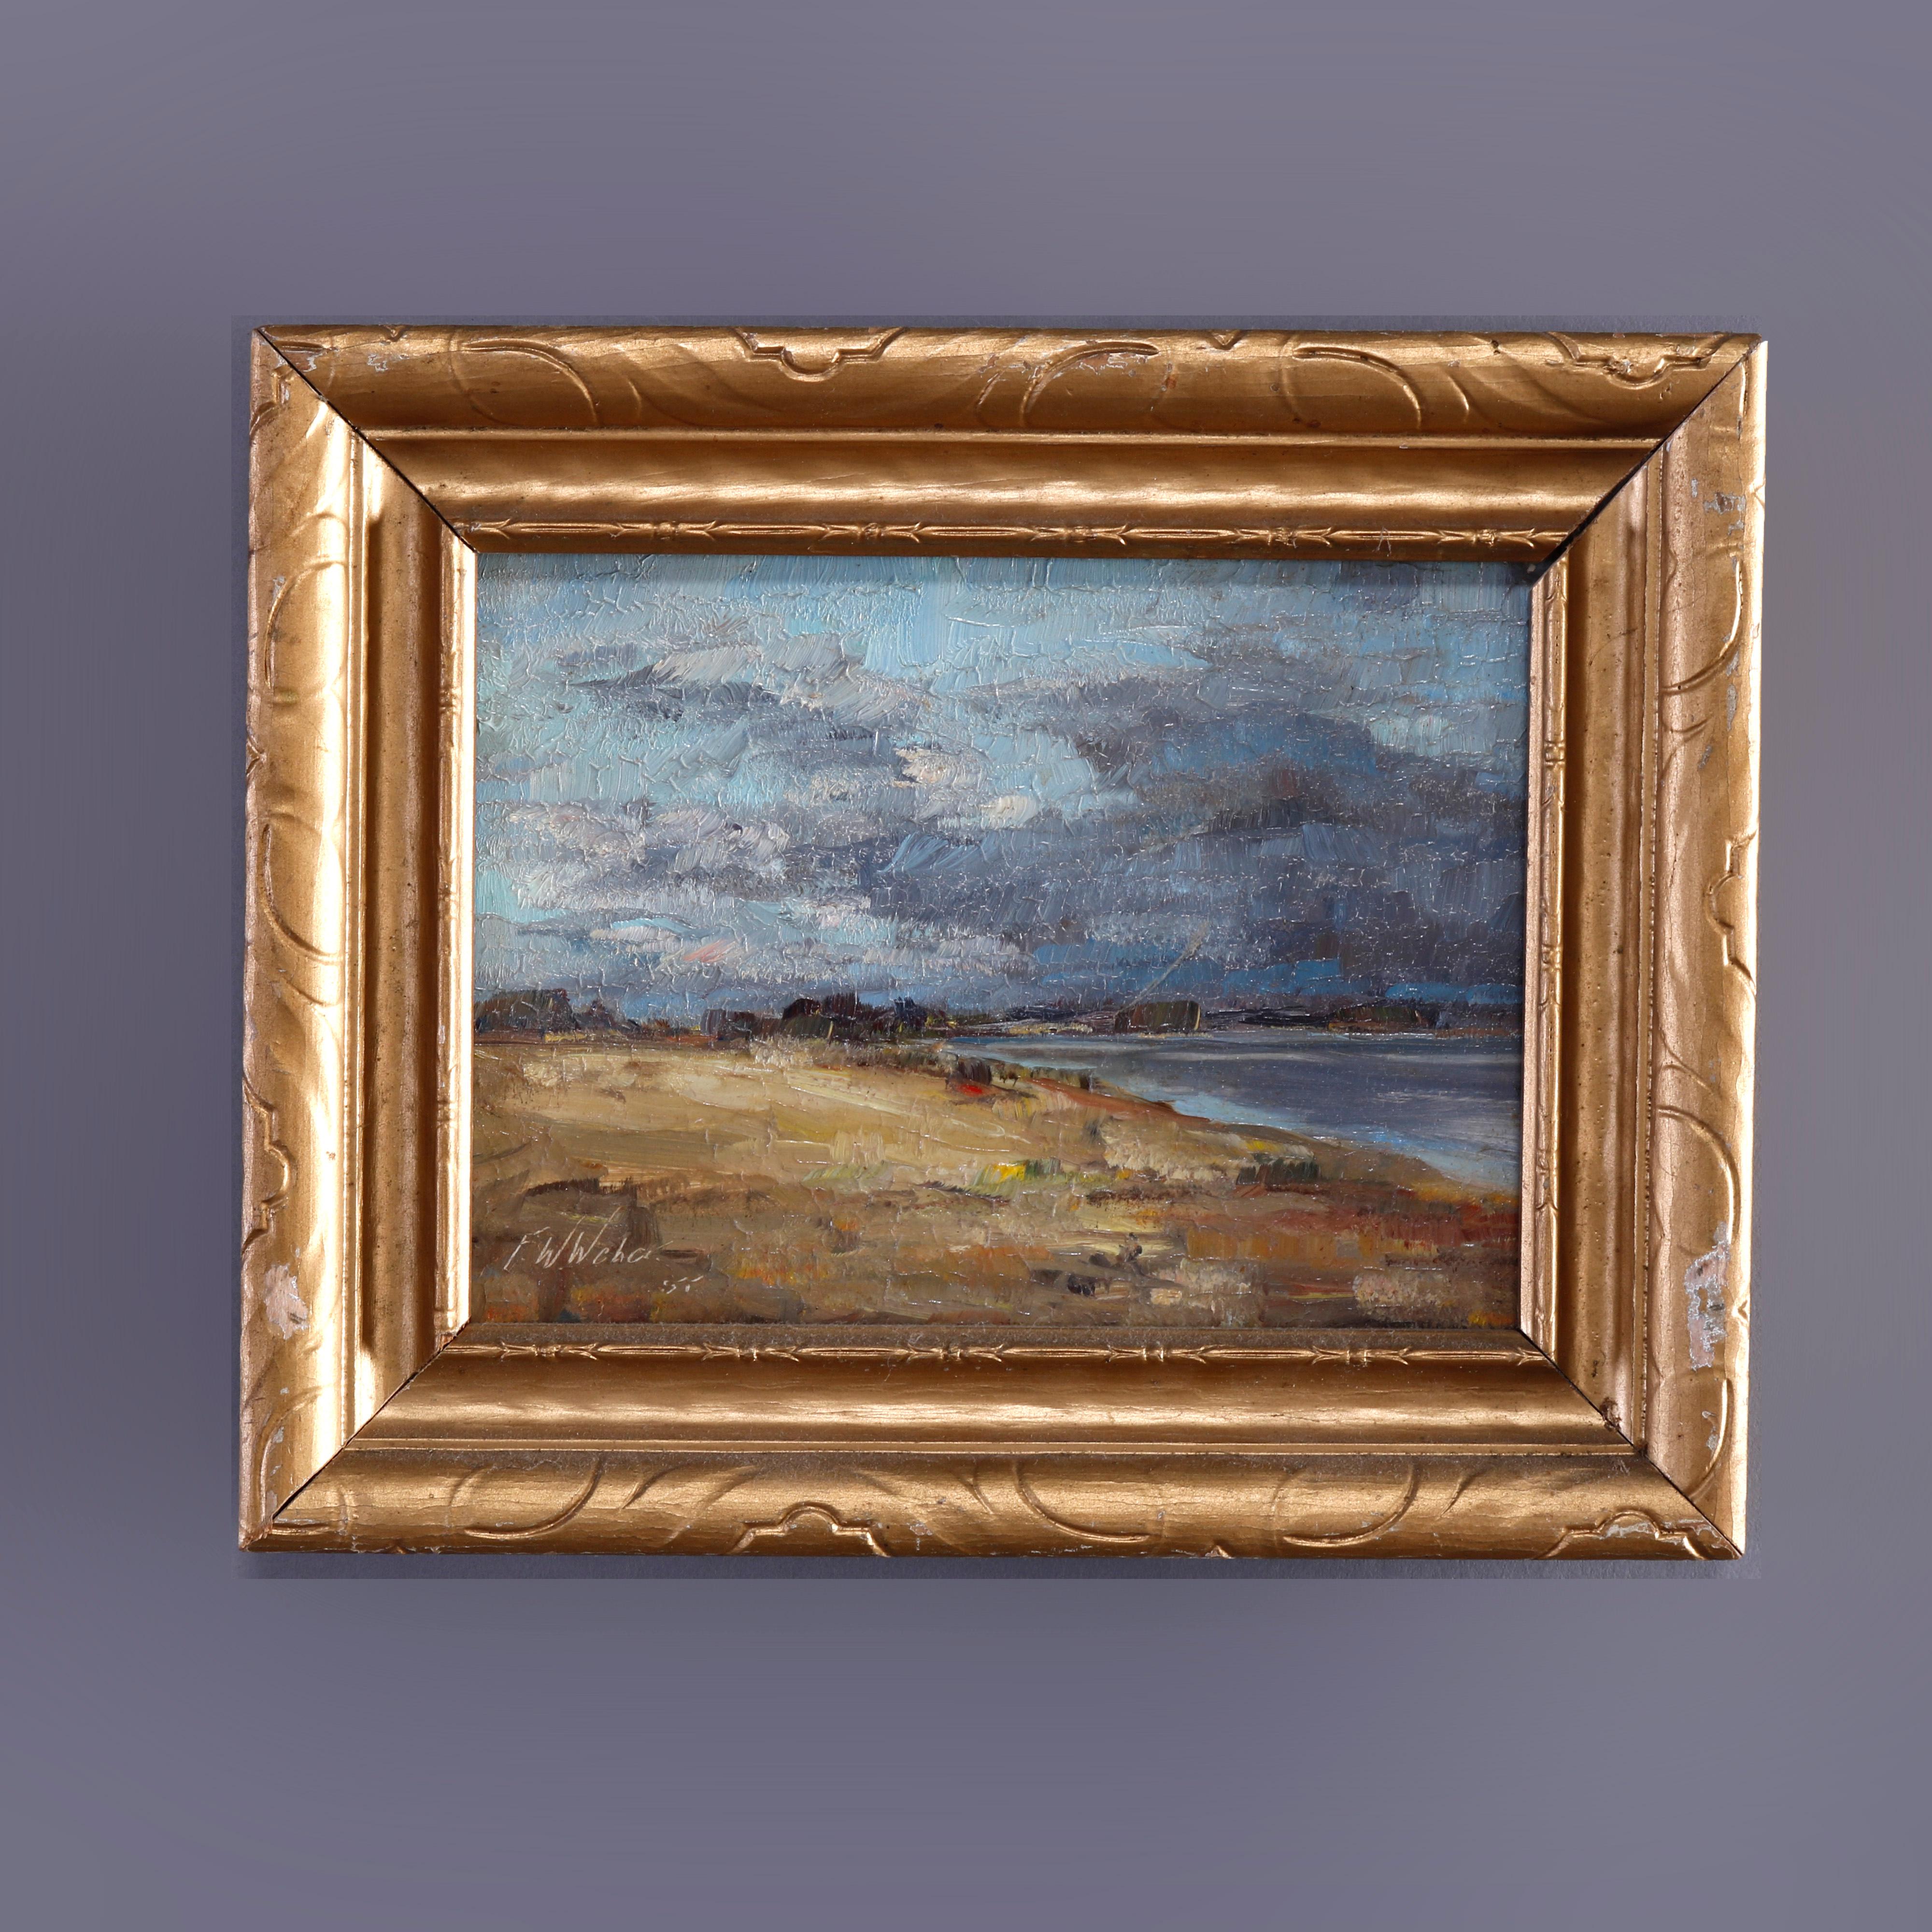 A vintage seascape painting by F. Weber offers oil on board coastal scene, artist signed lower left, seated in giltwood frame, c1957

Measures - overall 8''h x 9.75''w x 1''d; sight 7.5'' x 5.5''.